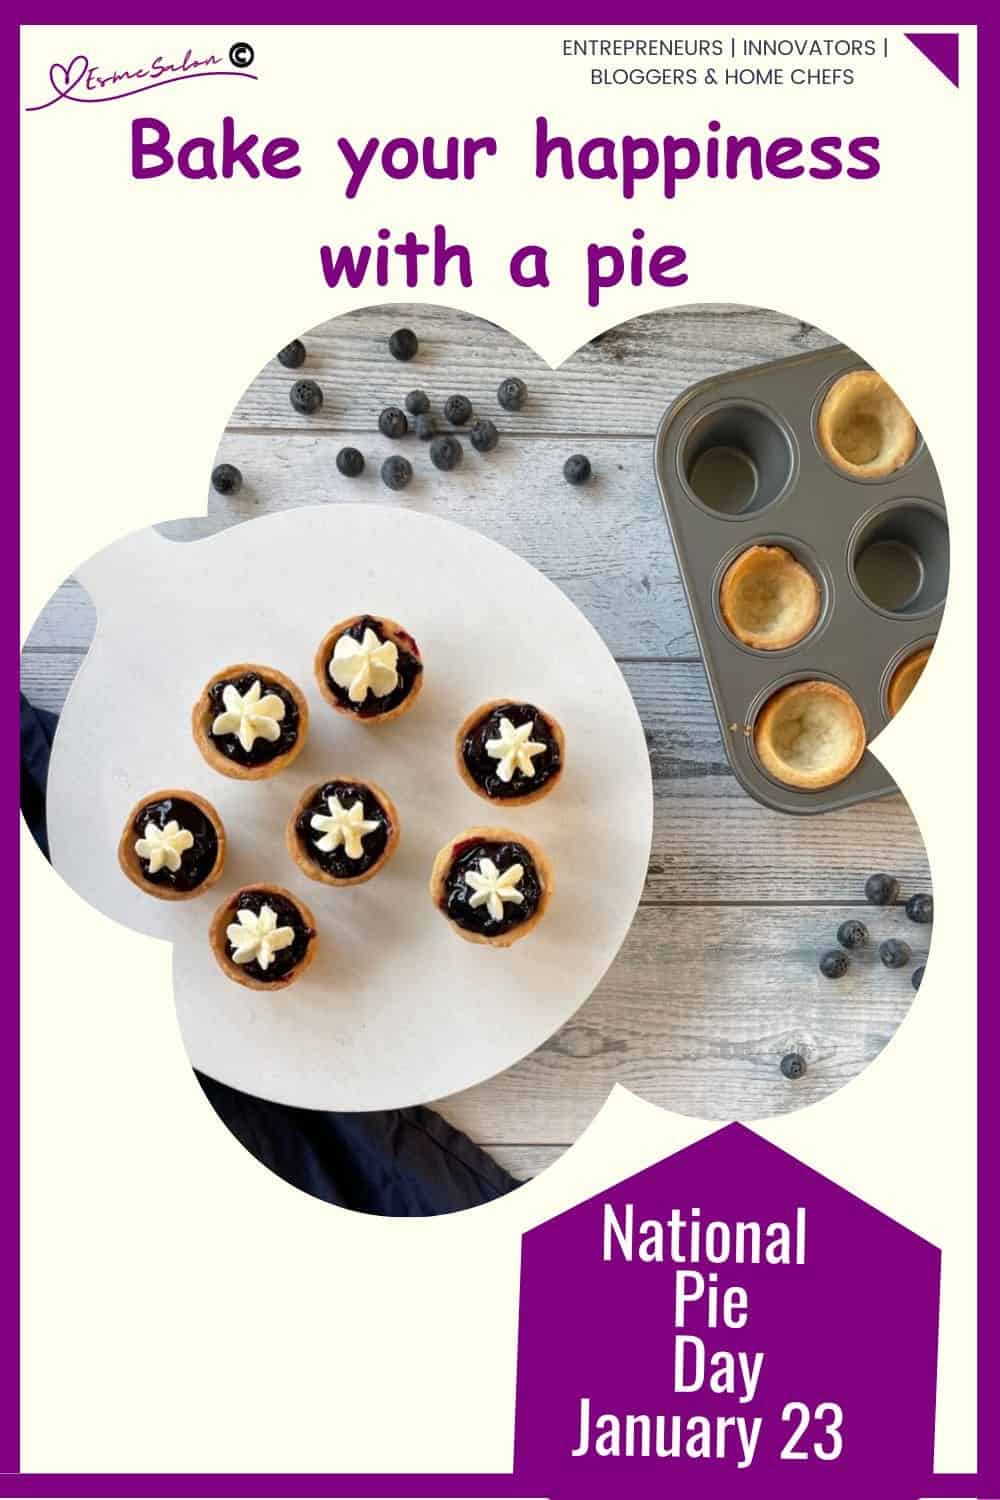 Bake your happiness with a pie, it's National Pie Day